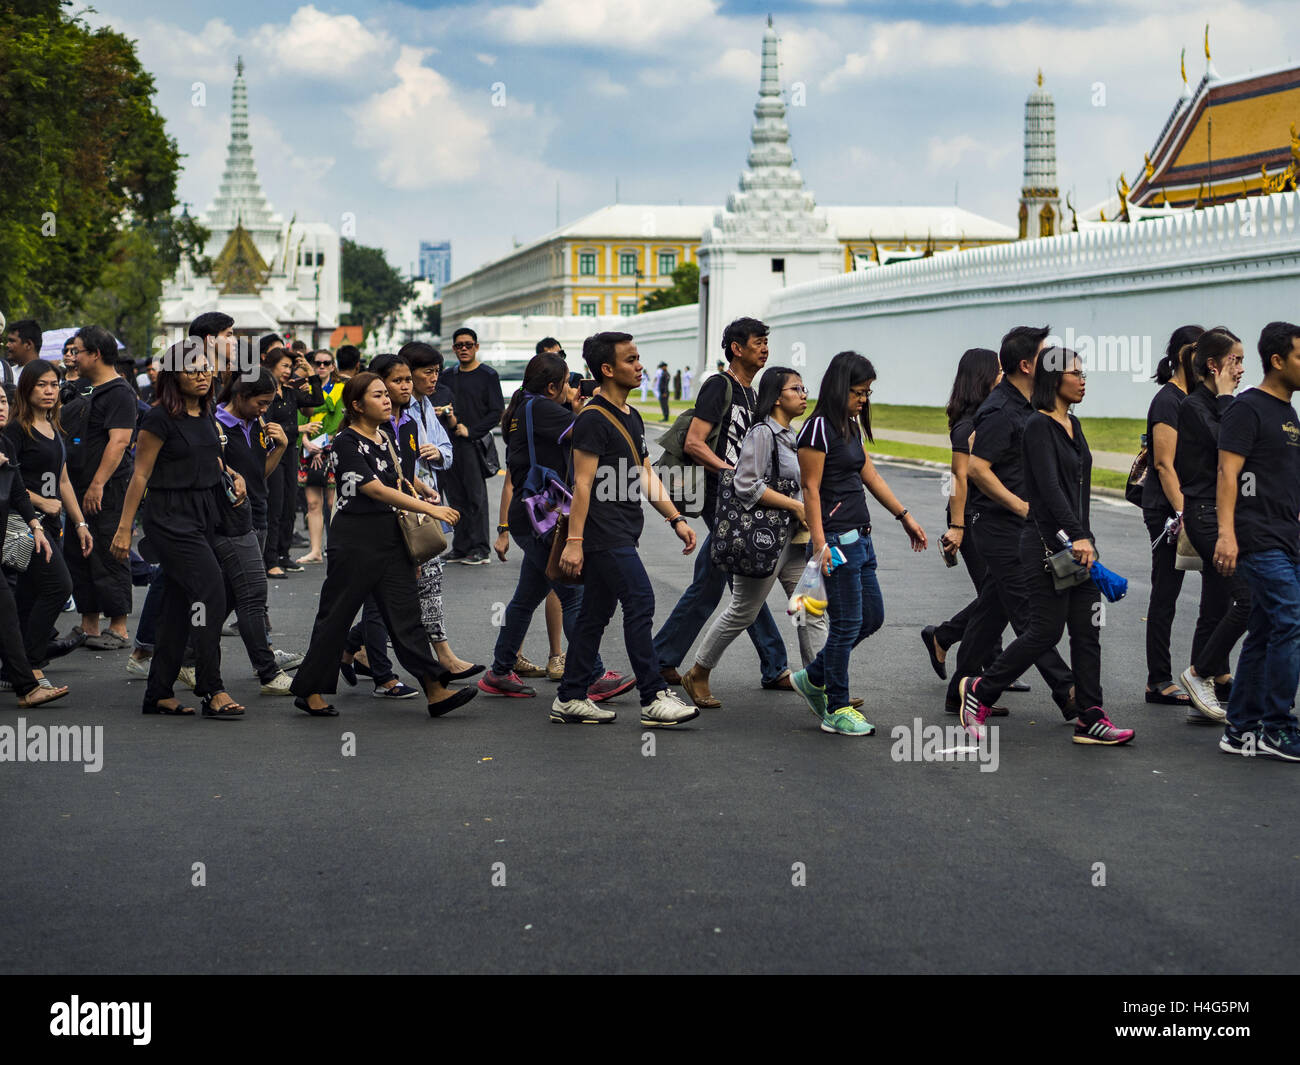 Bangkok, Bangkok, Thailand. 15th Oct, 2016. People walk into the Grand Palace to sign condolences books for Bhumibol Adulyadej, the King of Thailand. King Bhumibol Adulyadej died Oct. 13, 2016. He was 88. His death comes after a period of failing health. With the king's death, the world's longest-reigning monarch is Queen Elizabeth II, who ascended to the British throne in 1952. Bhumibol Adulyadej, was born in Cambridge, MA, on 5 December 1927. He was the ninth monarch of Thailand from the Chakri Dynasty and is known as Rama IX. He became King on June 9, 1946 and served as King of Thailand Stock Photo